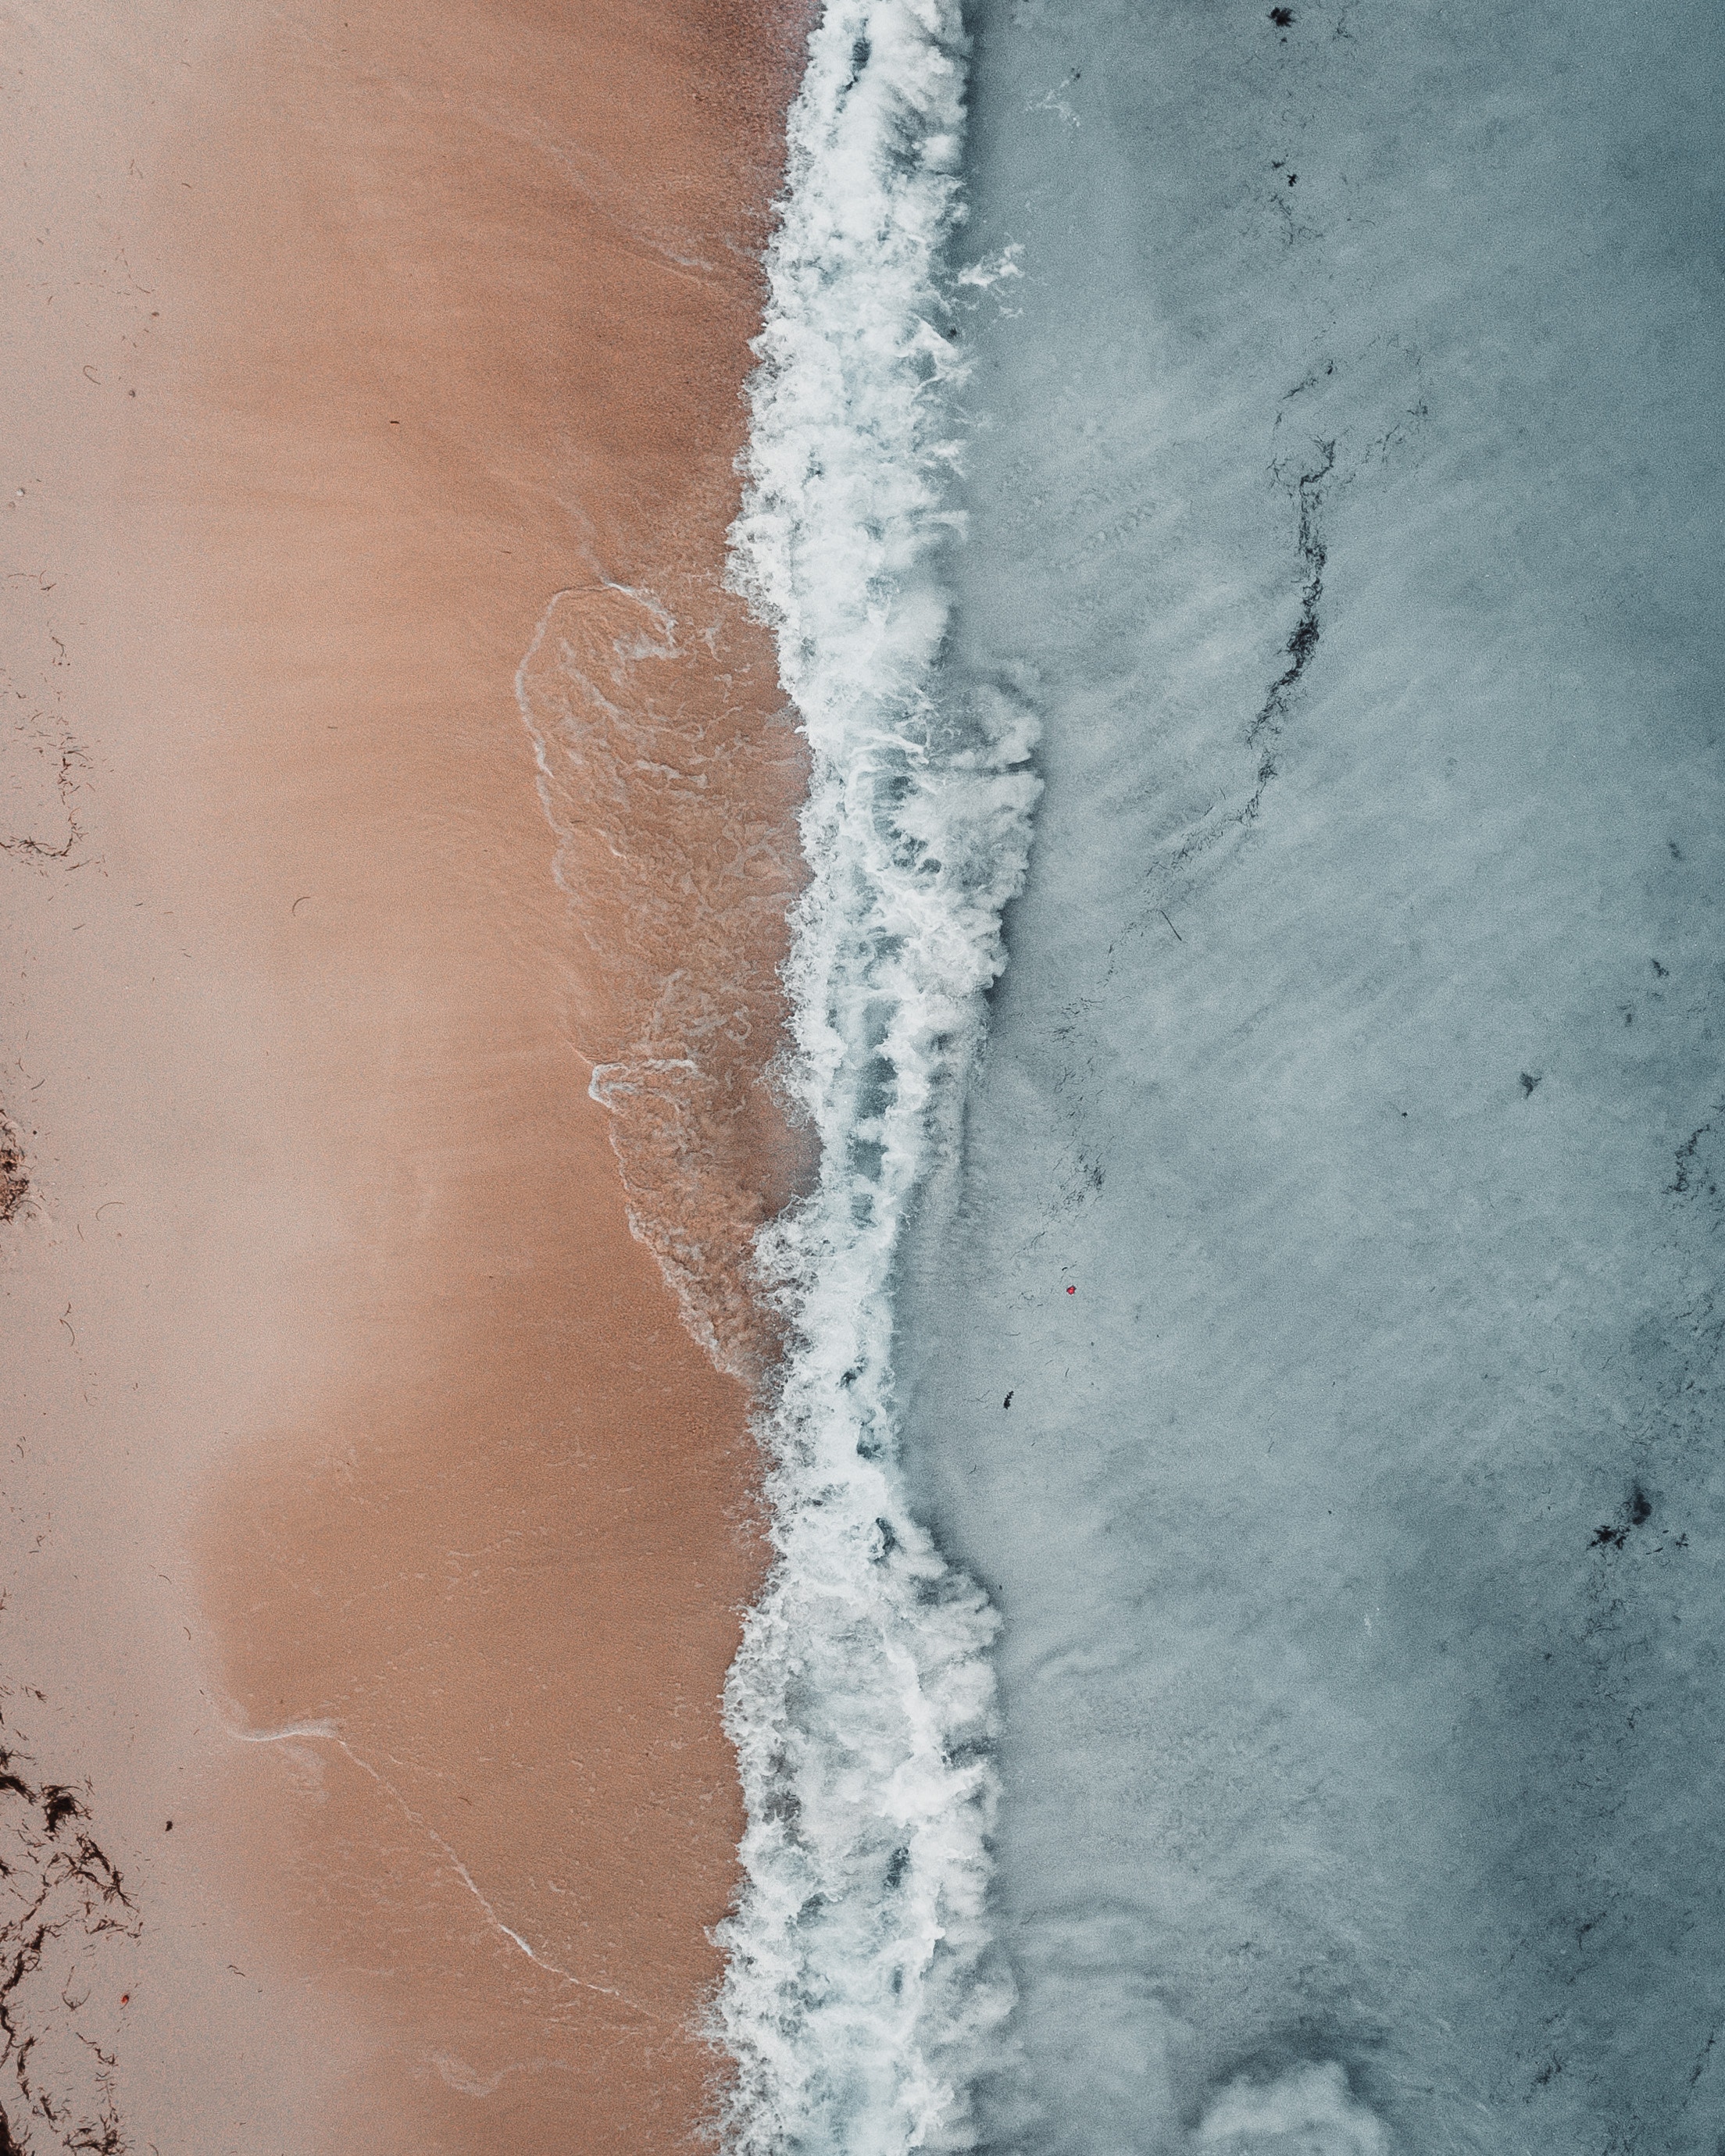 wave, view from above, nature, sand, shore, bank, ocean, surf lock screen backgrounds